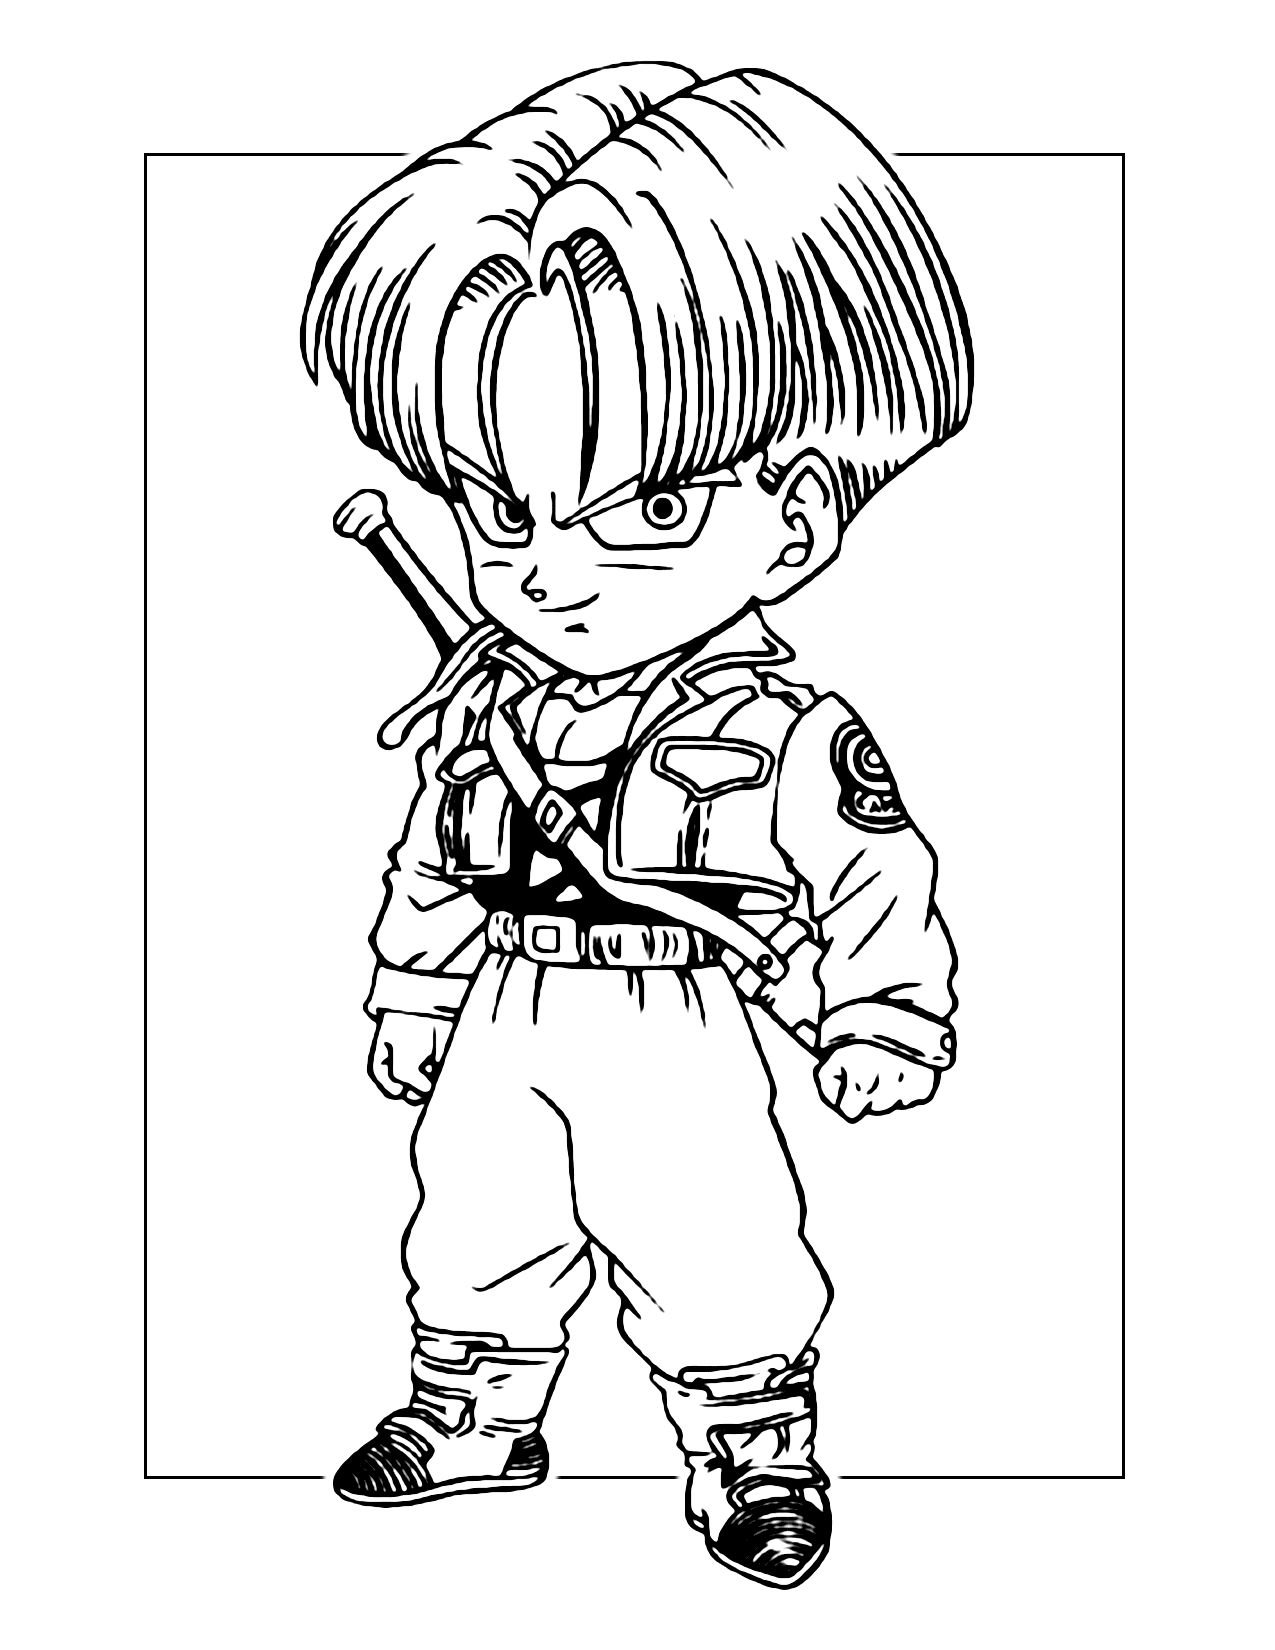 Young Trunks Dragon Ball Z Coloring Page